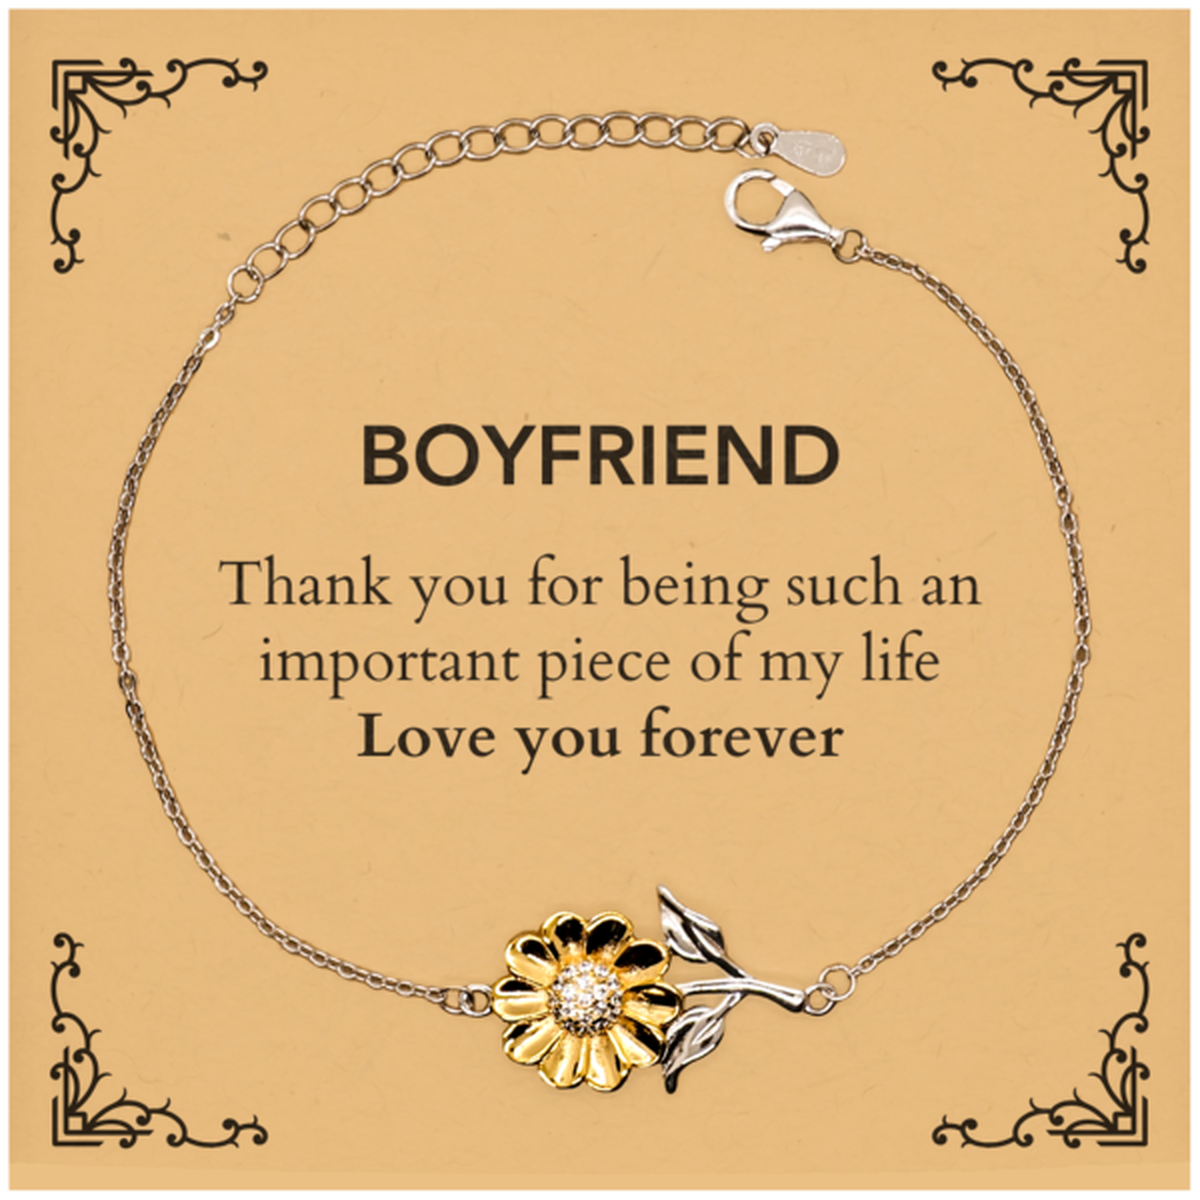 Appropriate Boyfriend Sunflower Bracelet Epic Birthday Gifts for Boyfriend Thank you for being such an important piece of my life Boyfriend Christmas Mothers Fathers Day